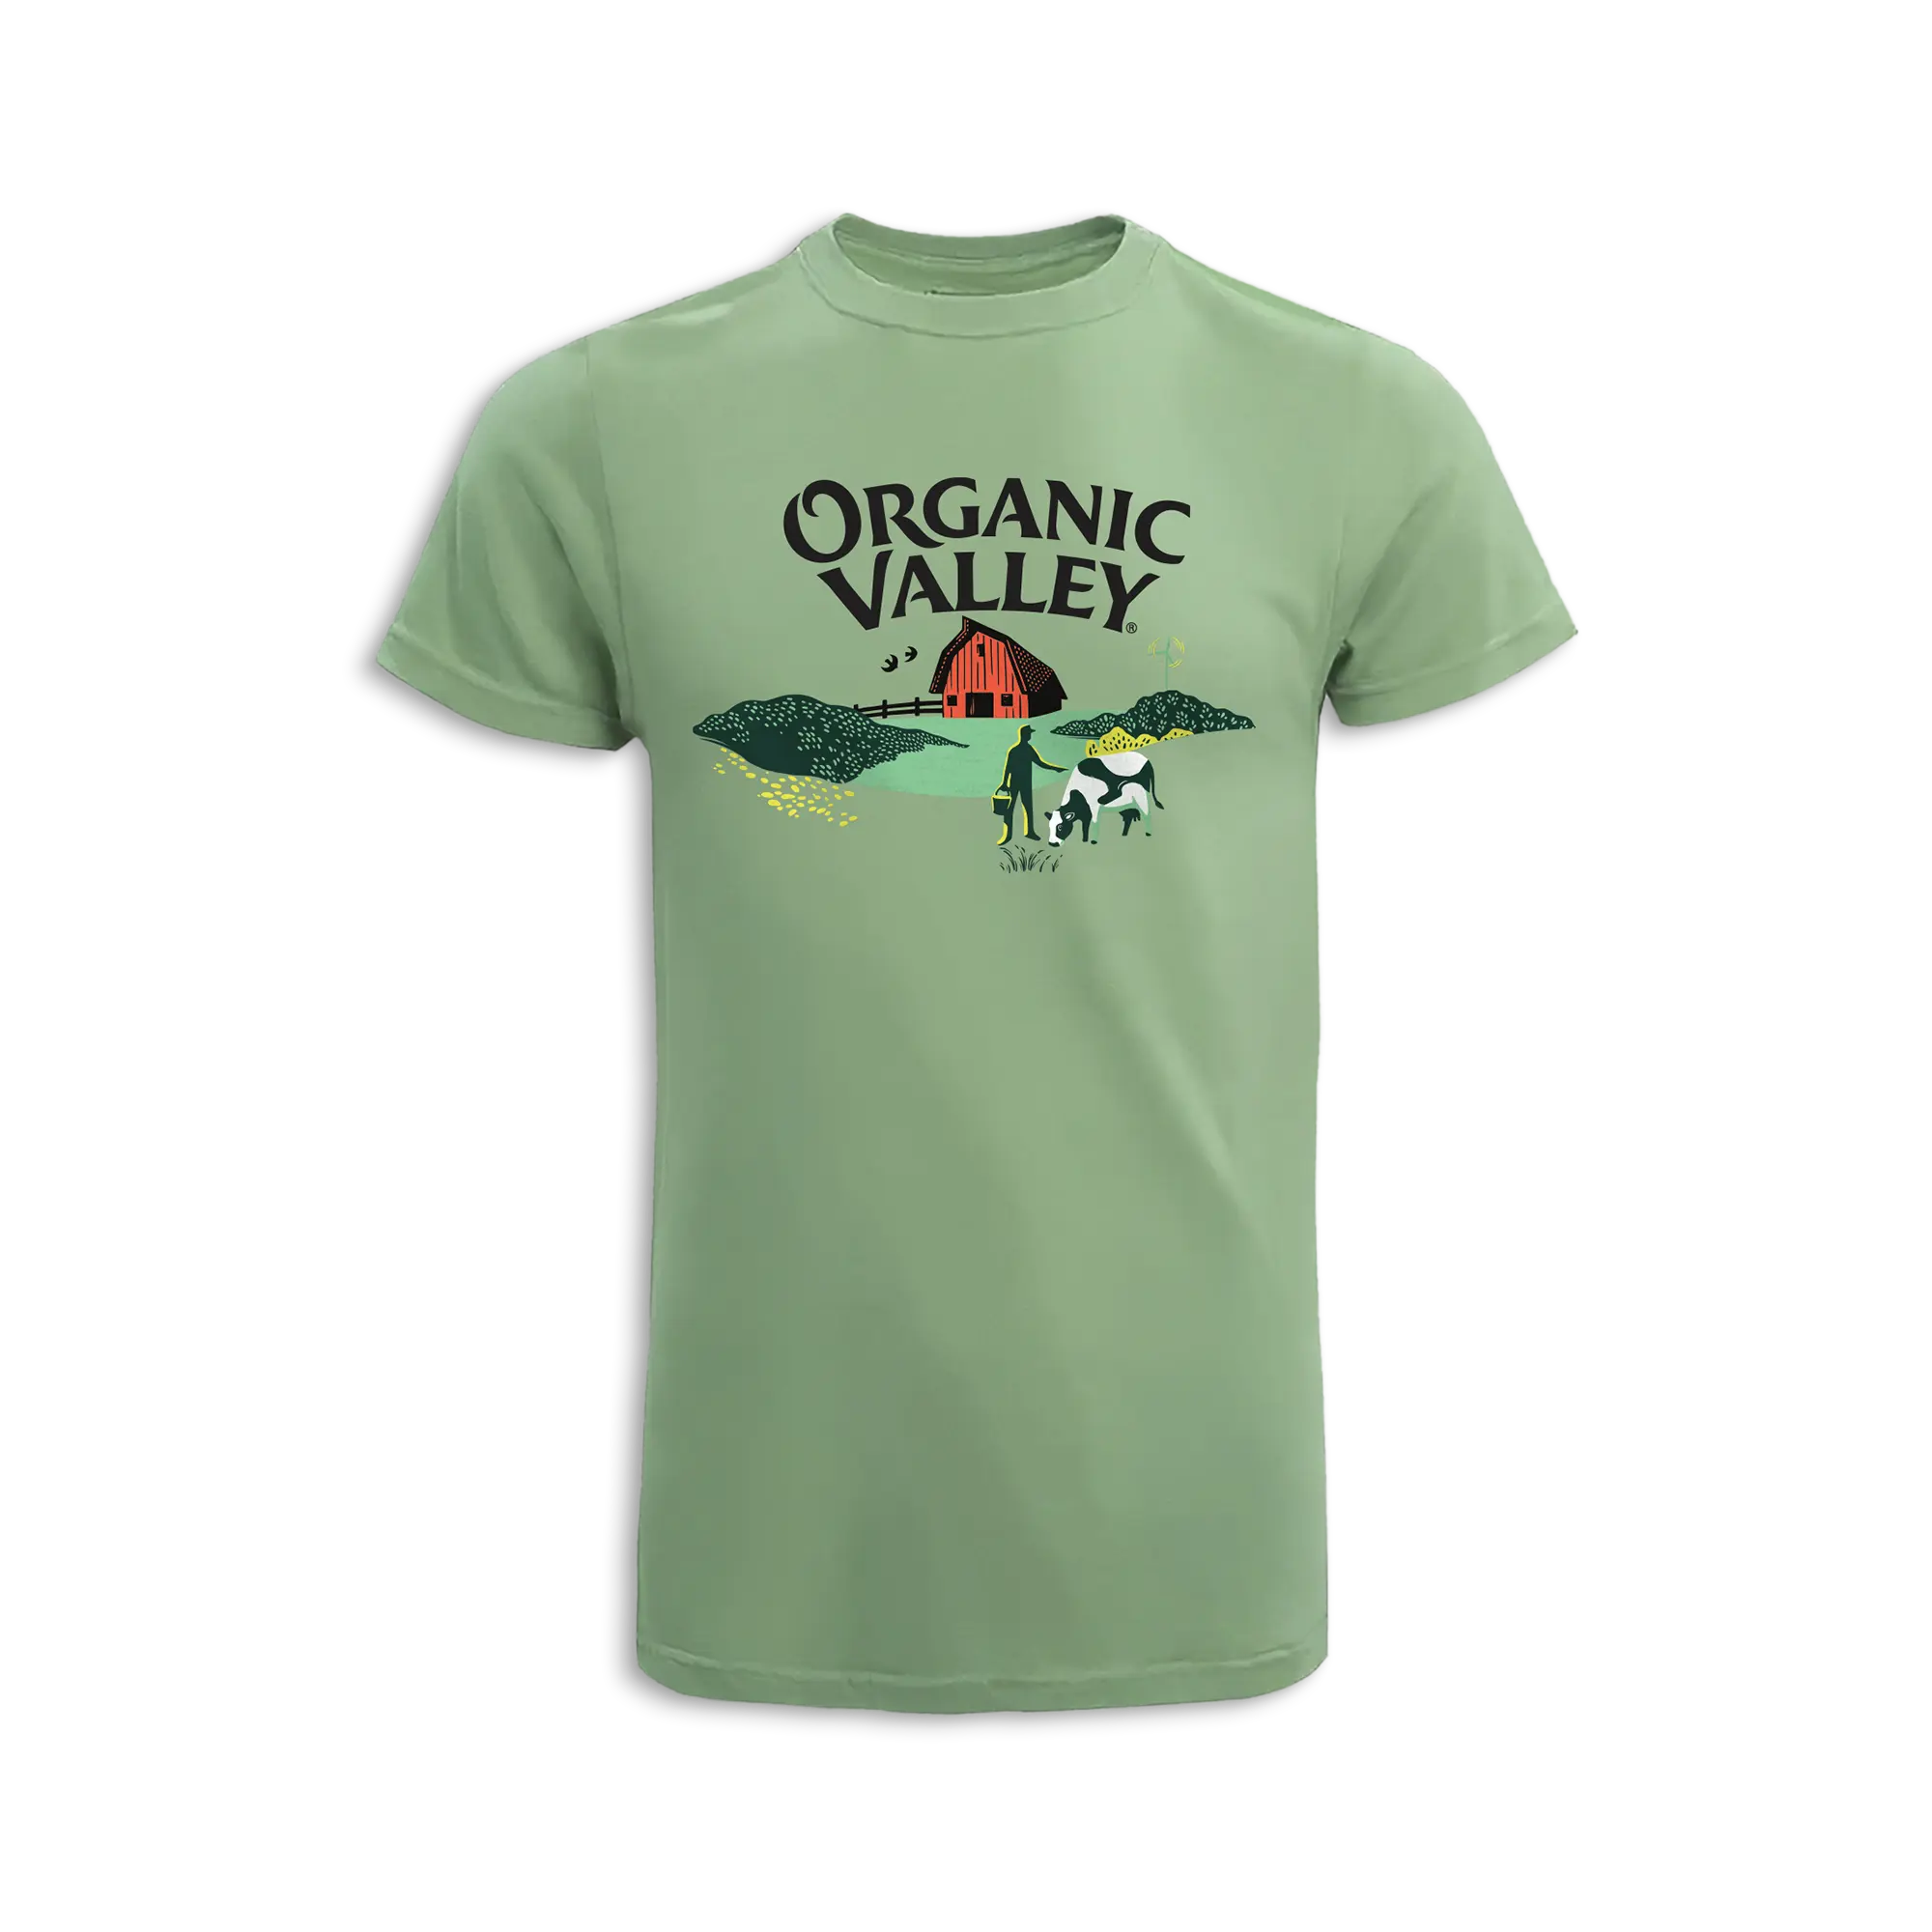 Visit the Organic Valley Logo Tee Product Page